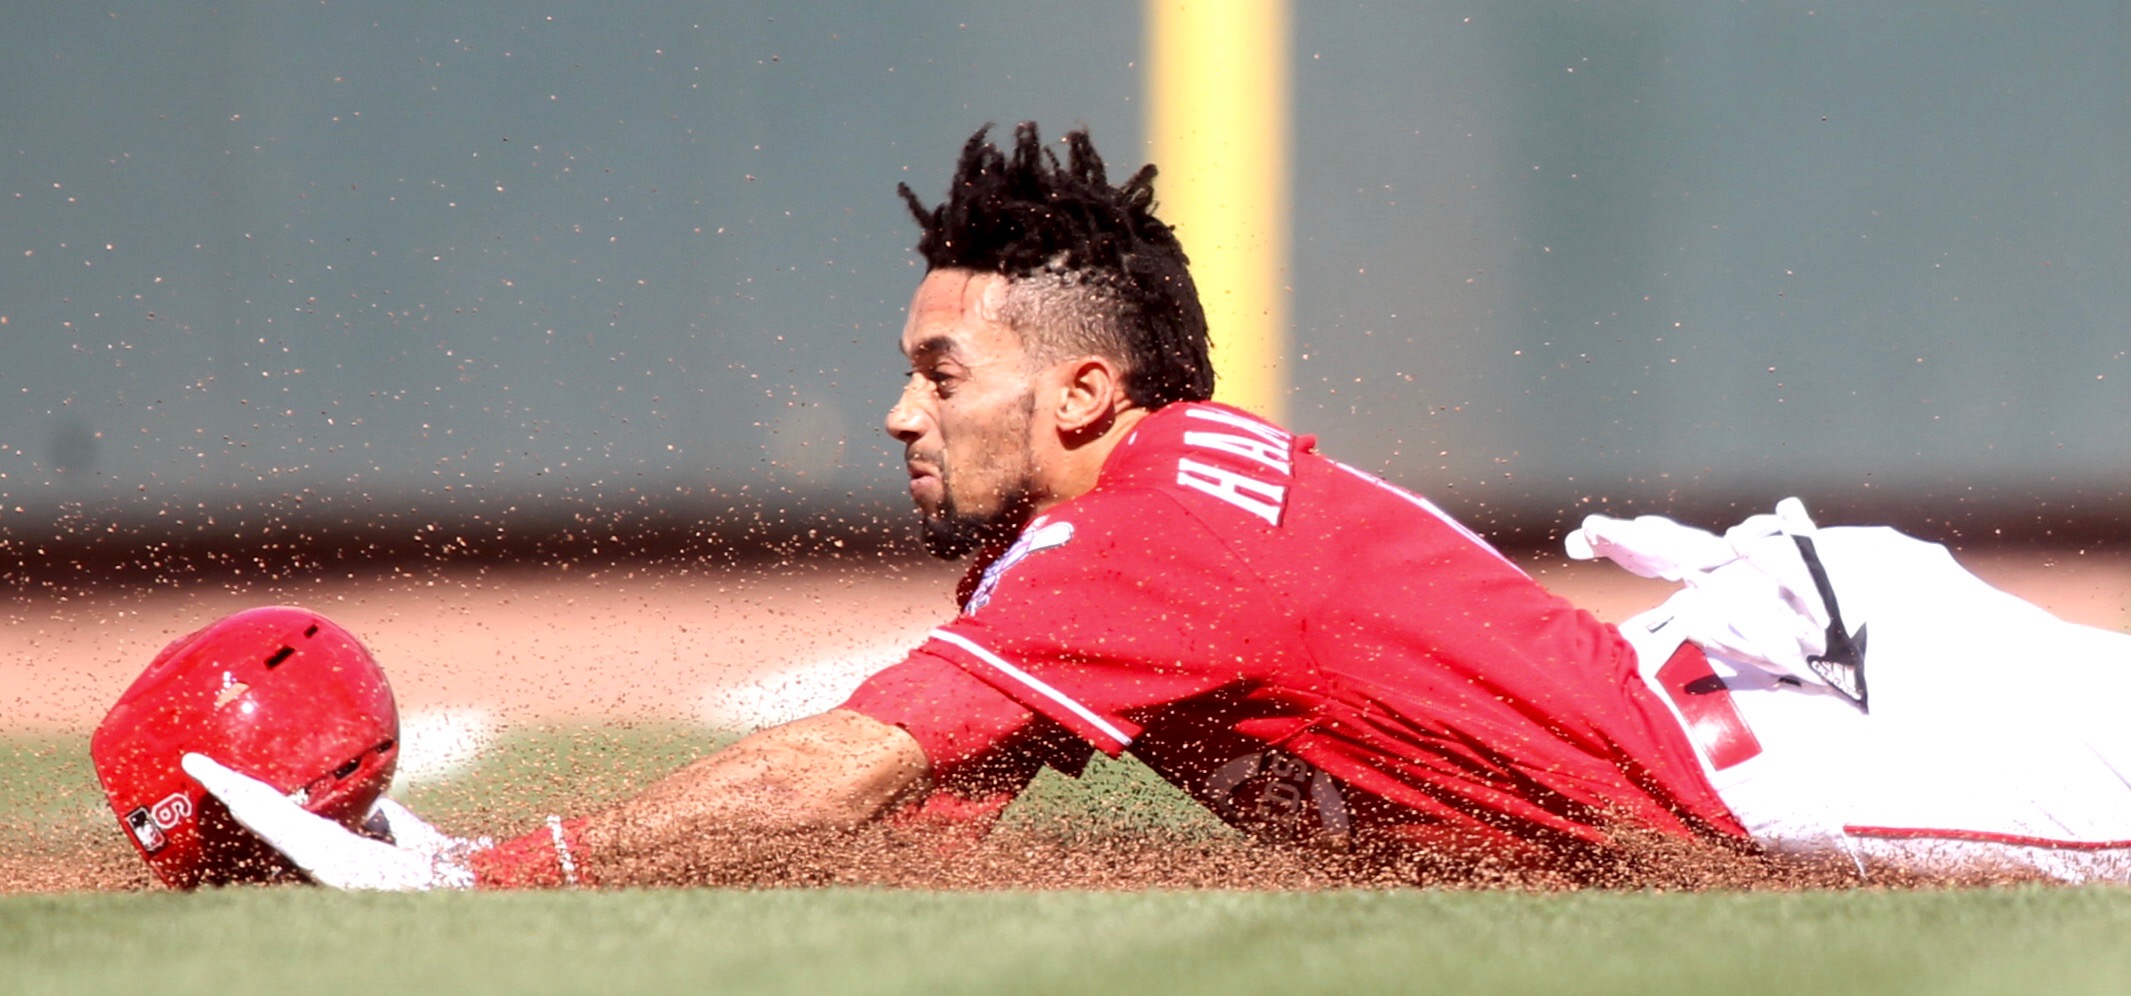 Stats prove Cincinnati Reds' Billy Hamilton is fastest player in game